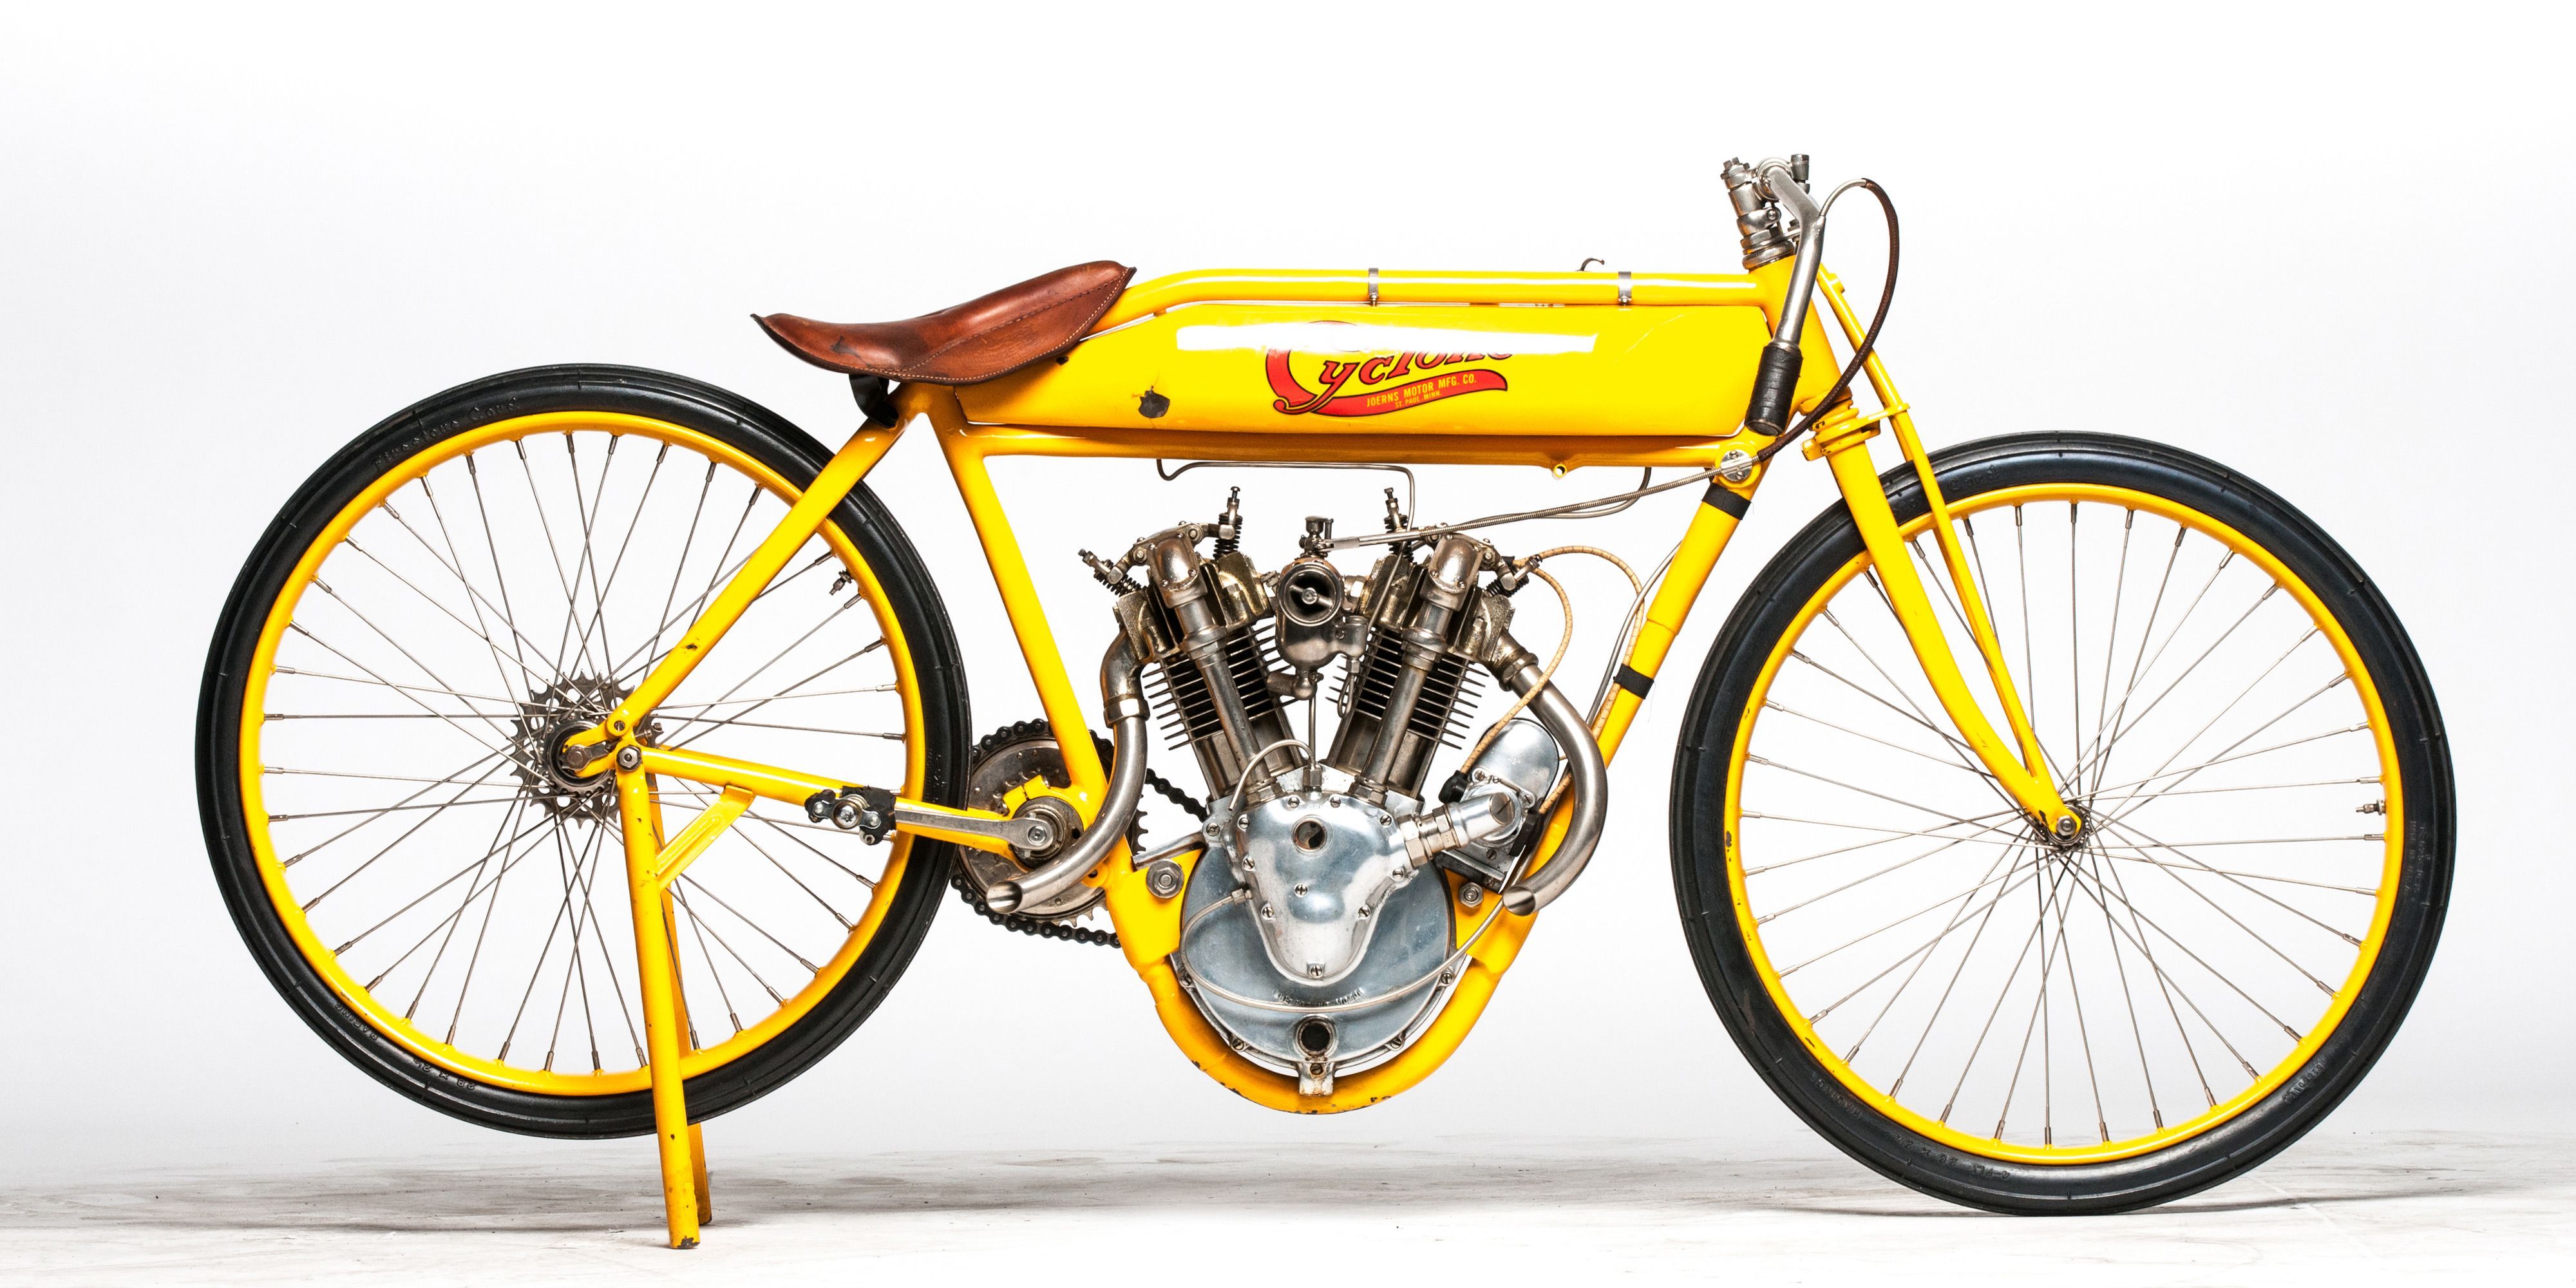 the 1915 Cyclone Board Track Racer.